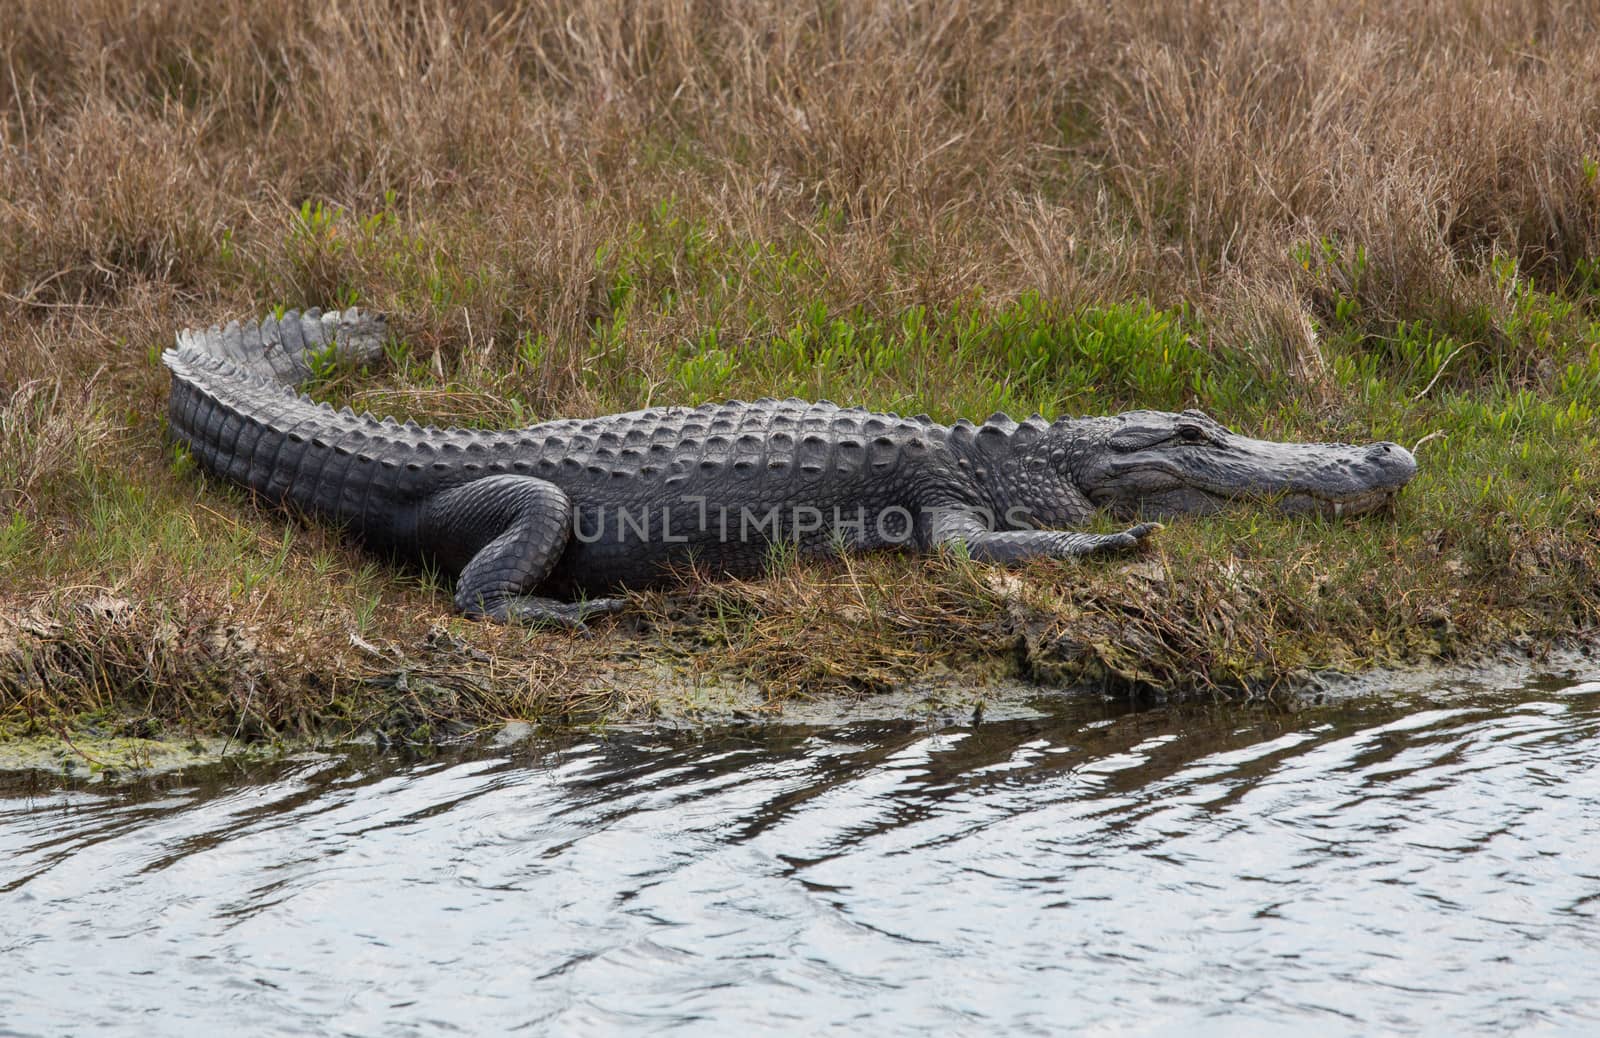 I didn't say they are comely shapes. The gator population has grown in recent years thanks to legislation and places like the Merritt Island National Wildlife Reserve.